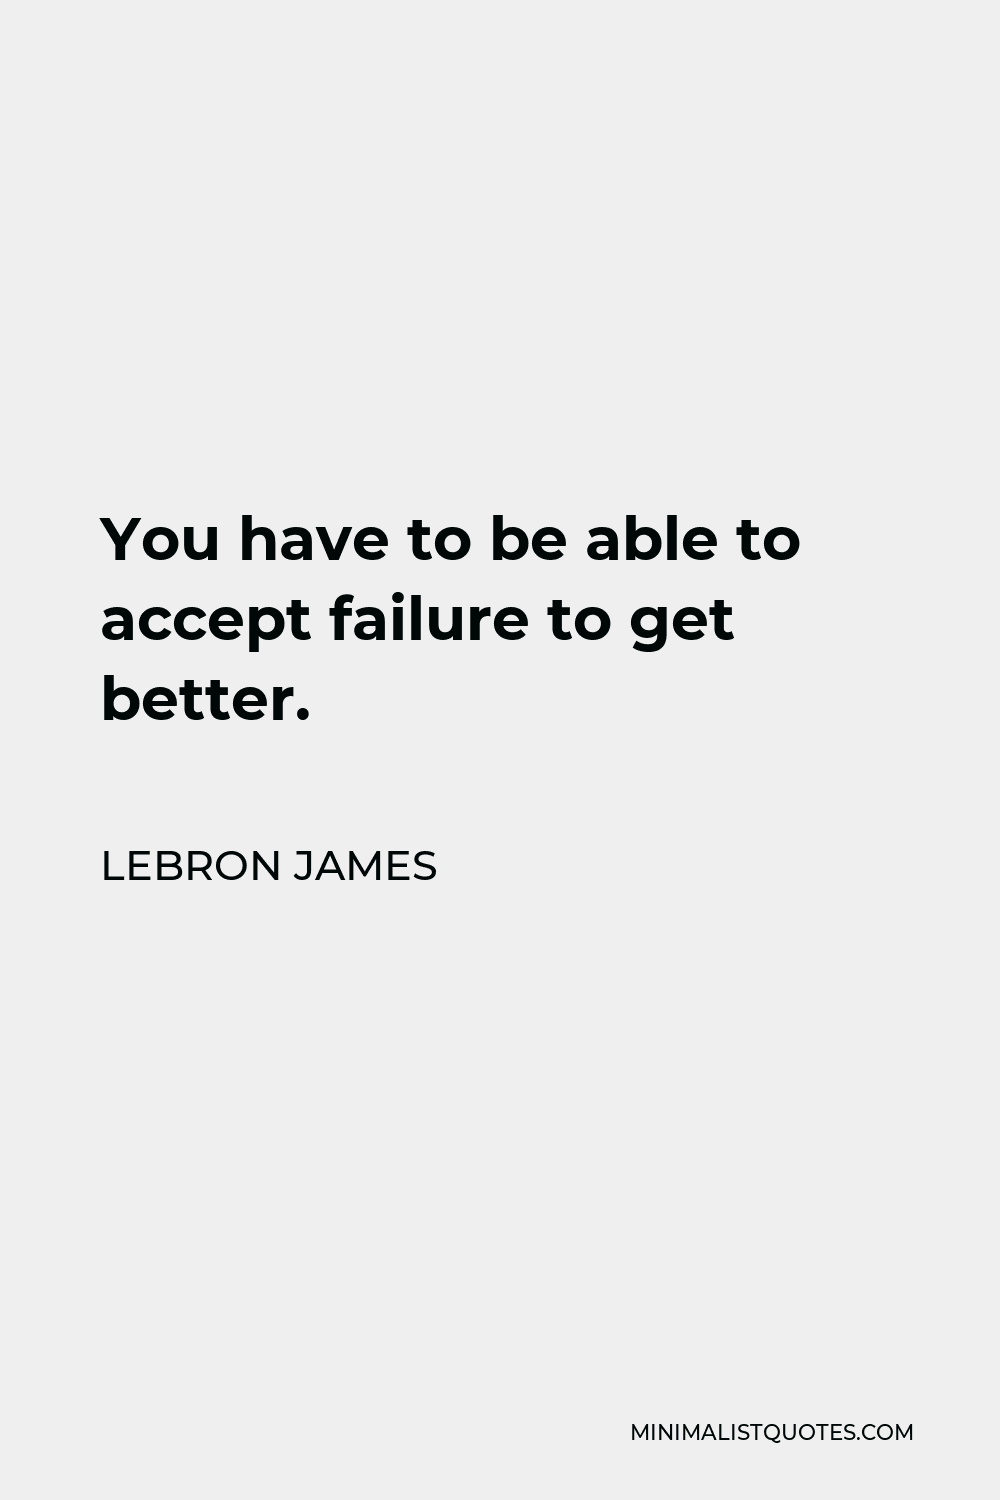 LeBron James Quote - You have to be able to accept failure to get better.